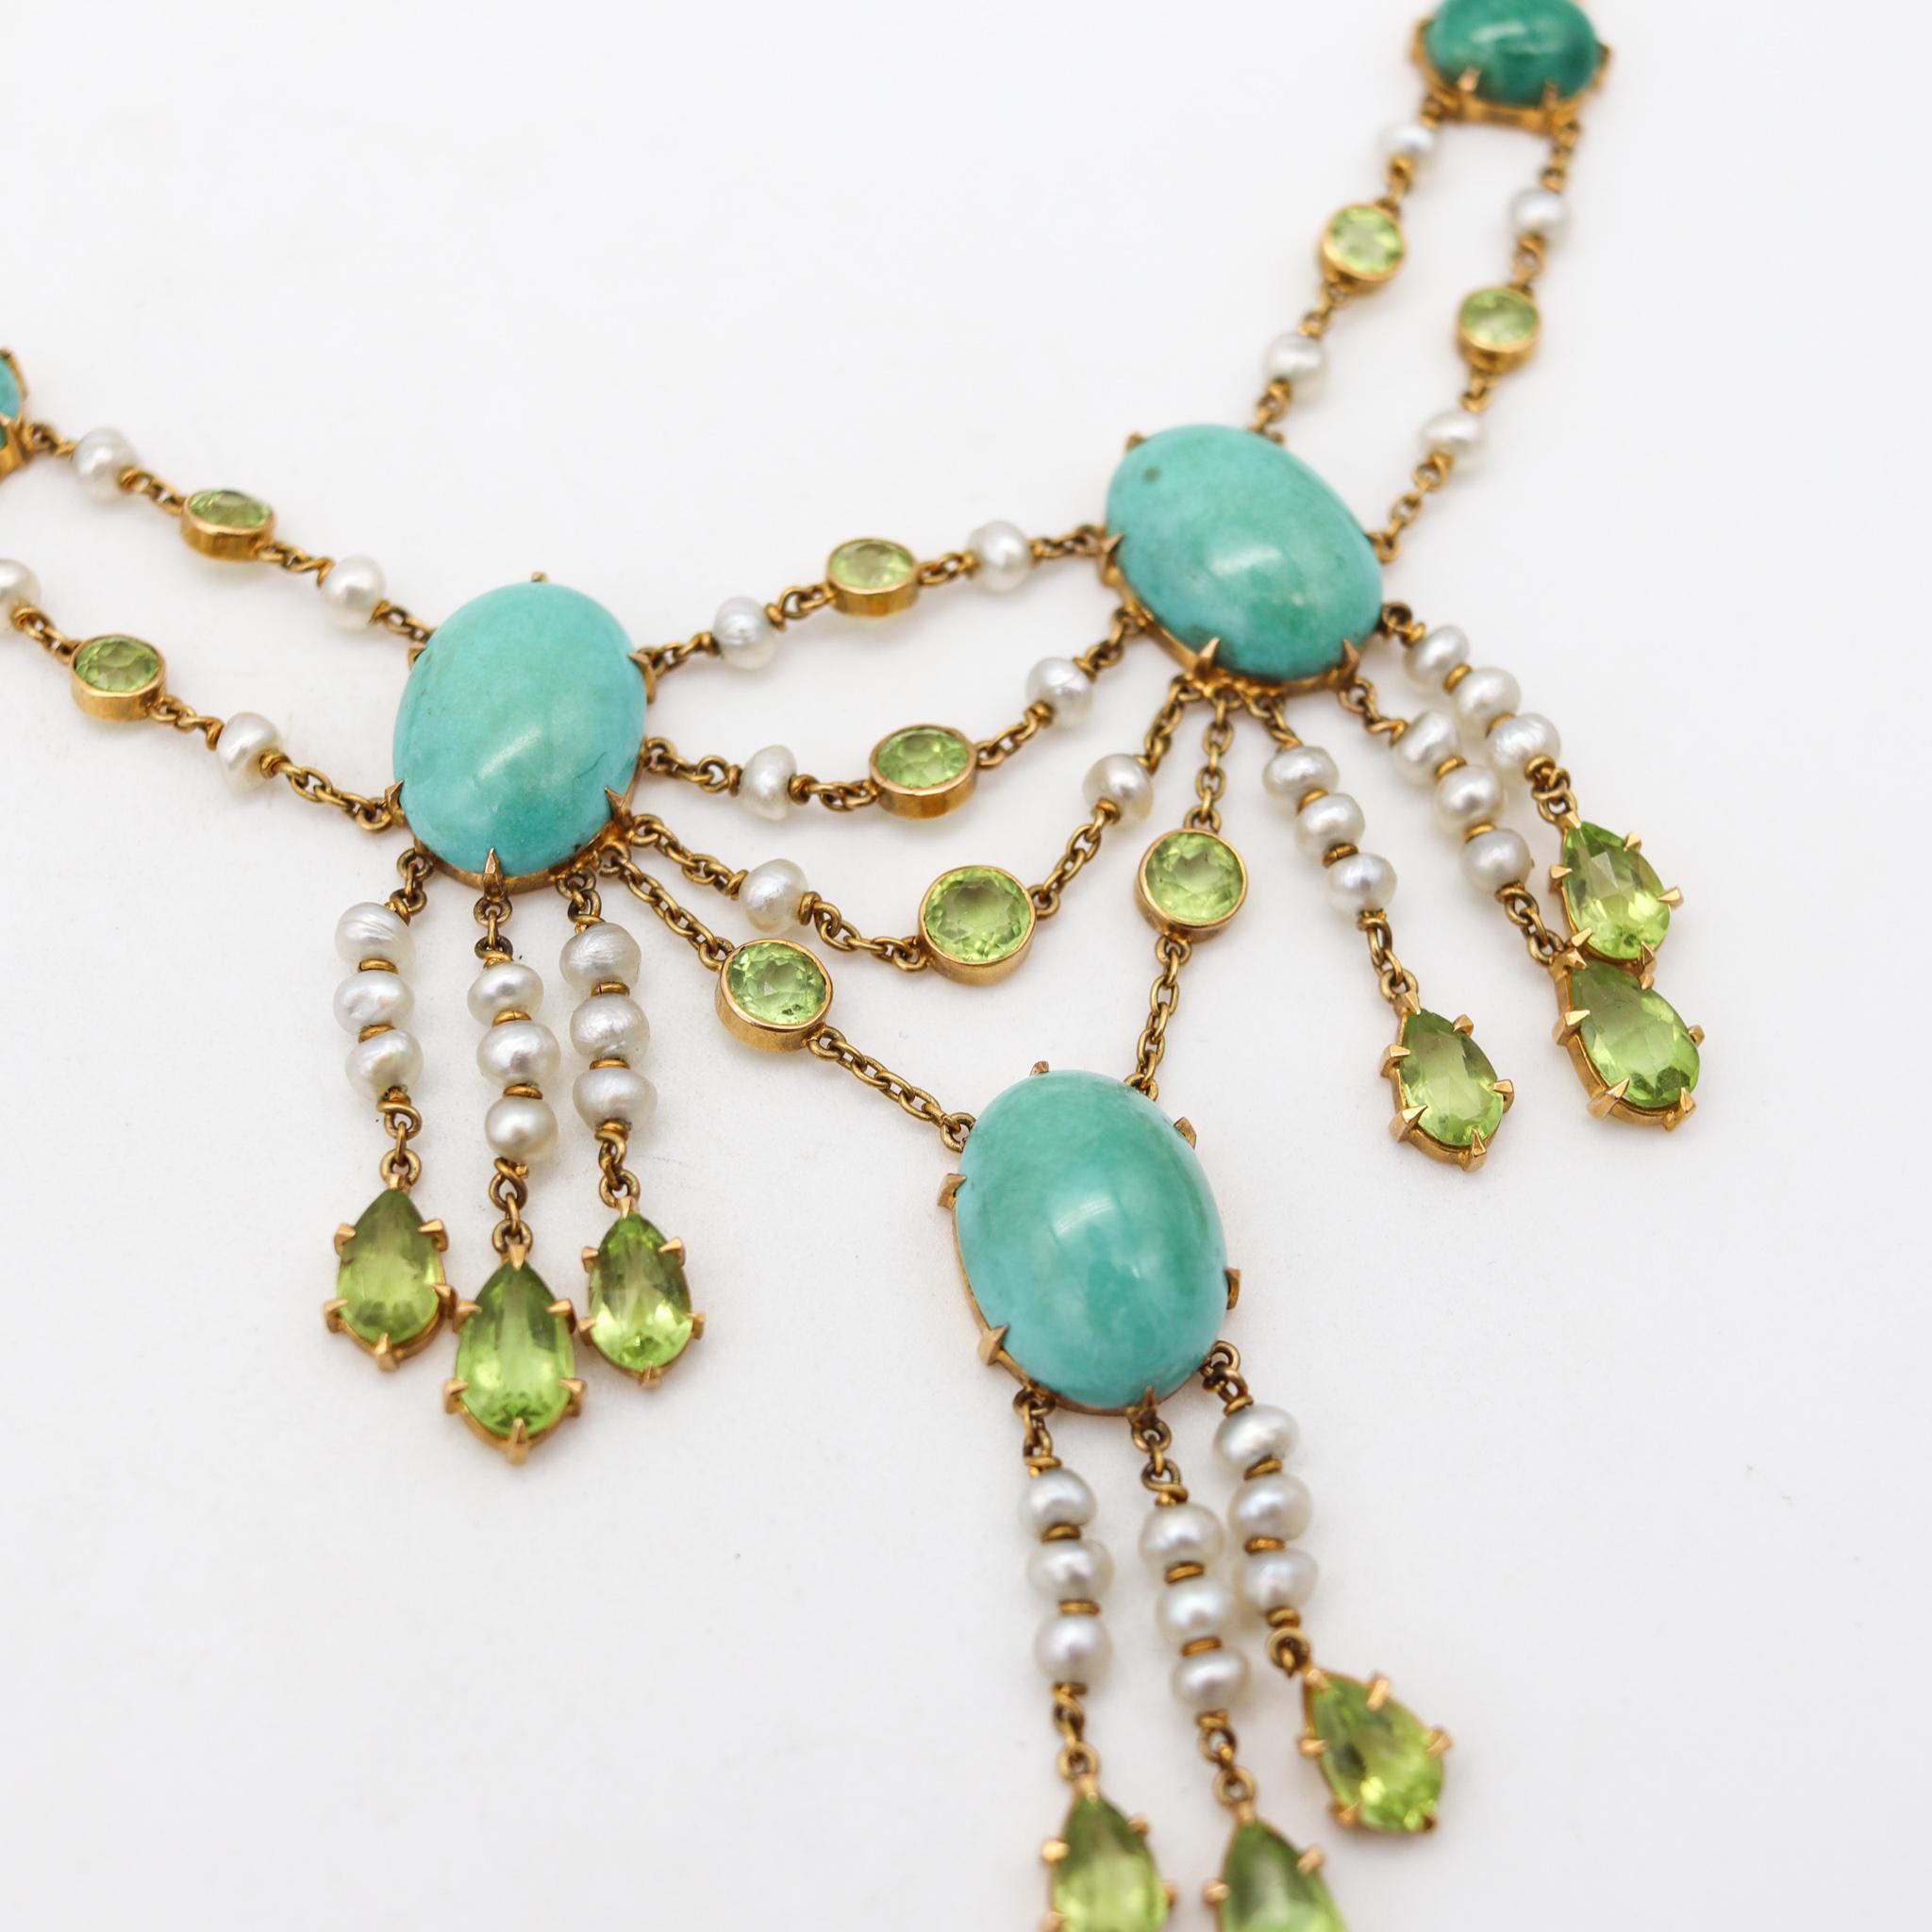 Victorian 1890 Necklace in 18kt Gold with 51.04cts Peridots Turquoises & Pearls In Excellent Condition For Sale In Miami, FL